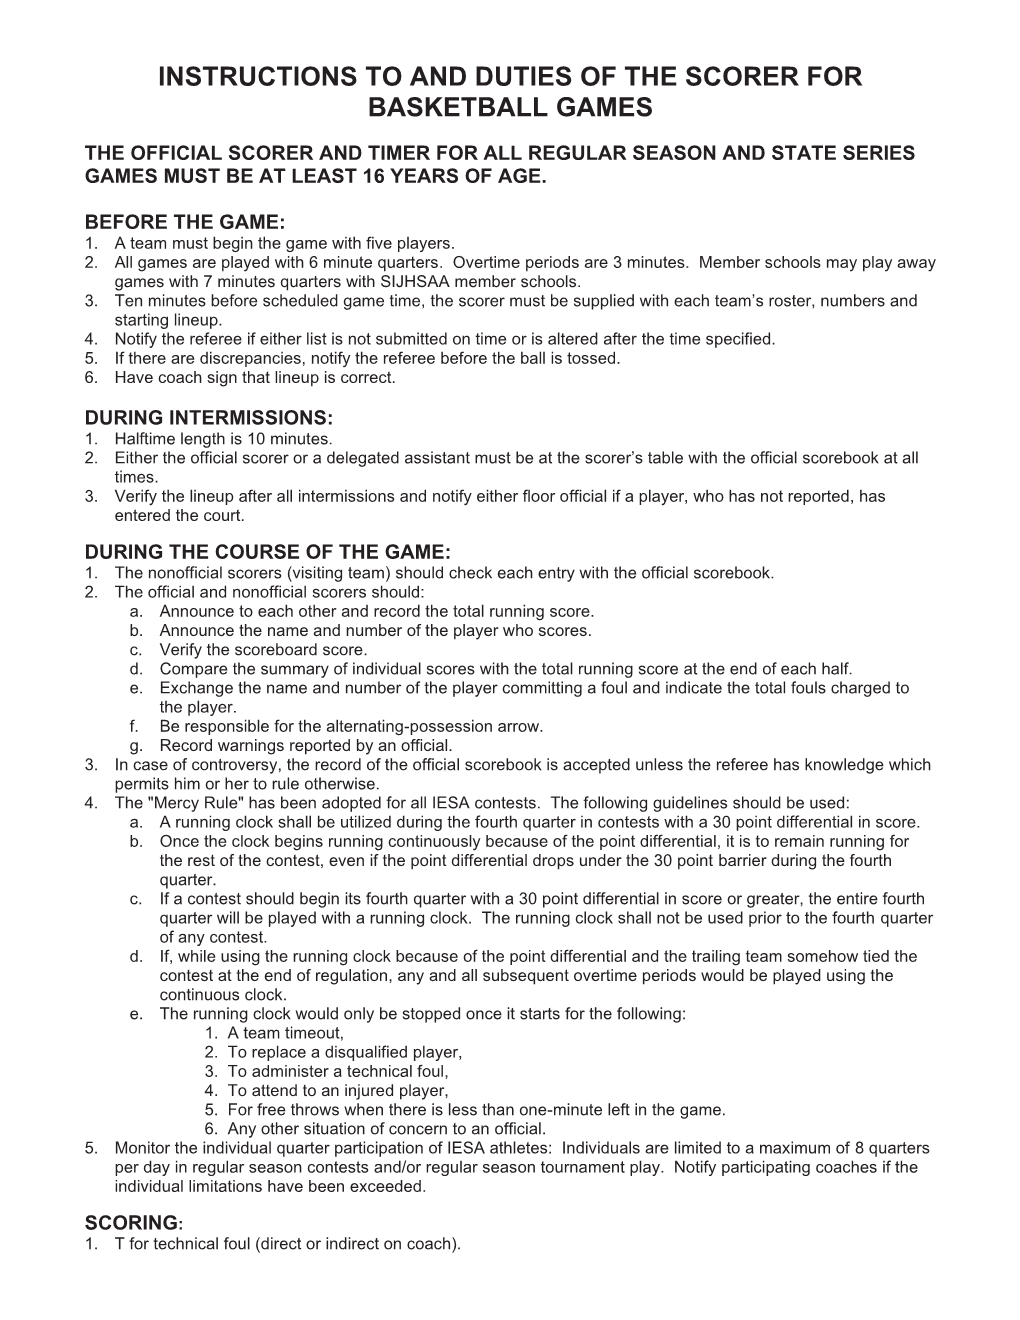 Instructions to and Duties of the Scorer for Basketball Games